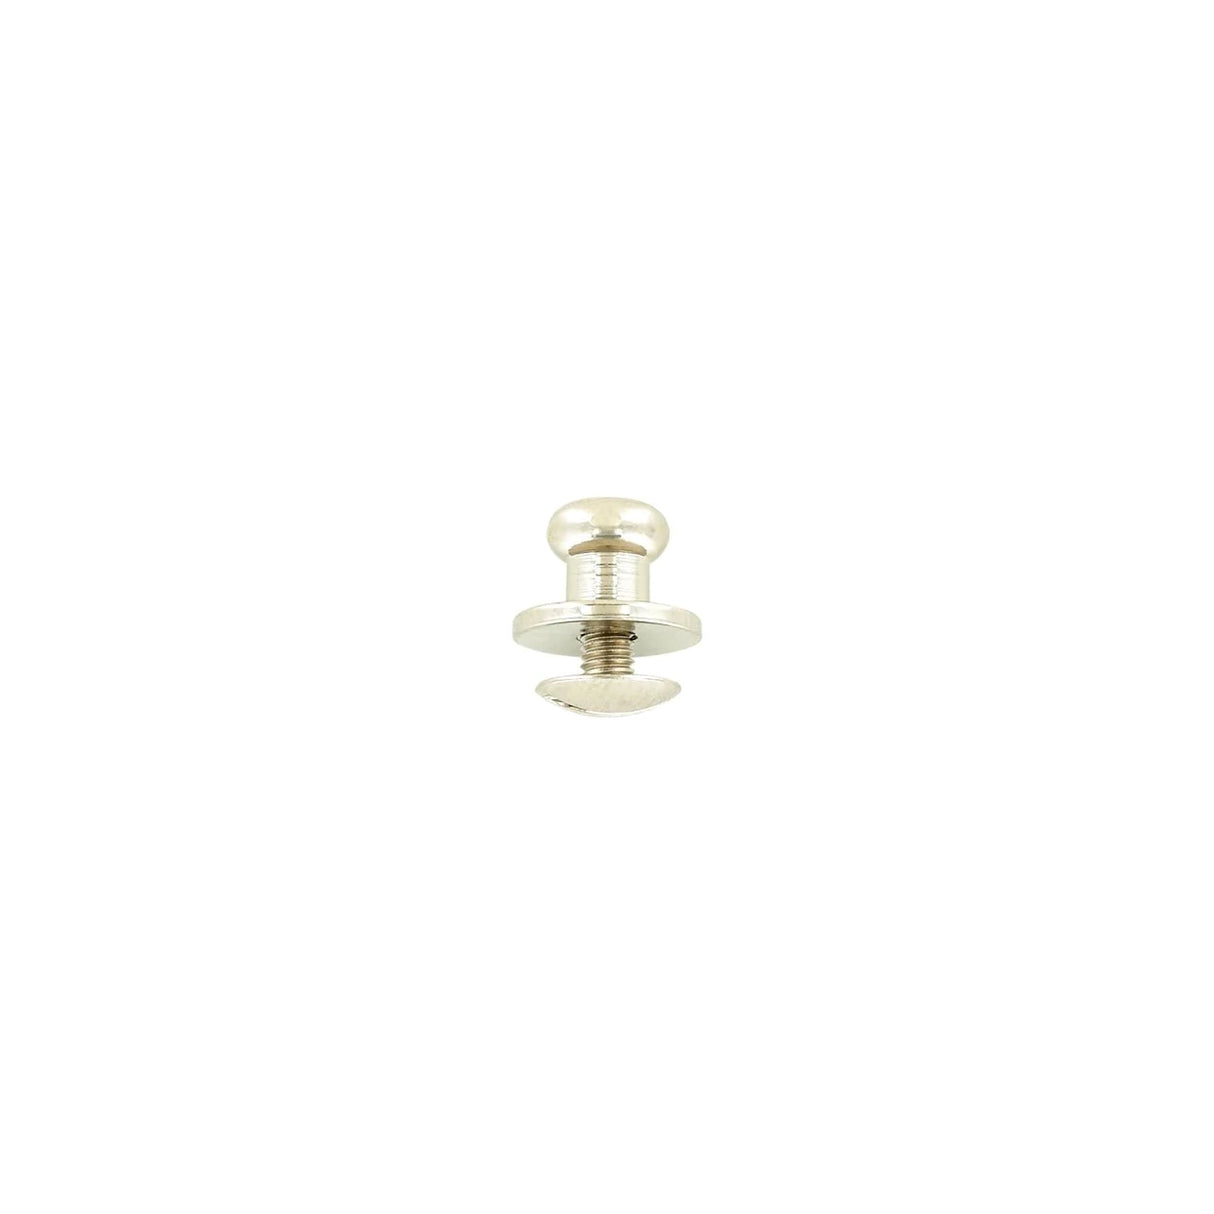 10mm, Shiny Nickel, Flat Top Collar Button Stud with Screw, Solid Brass - PK5, #P-287-SM-SBN